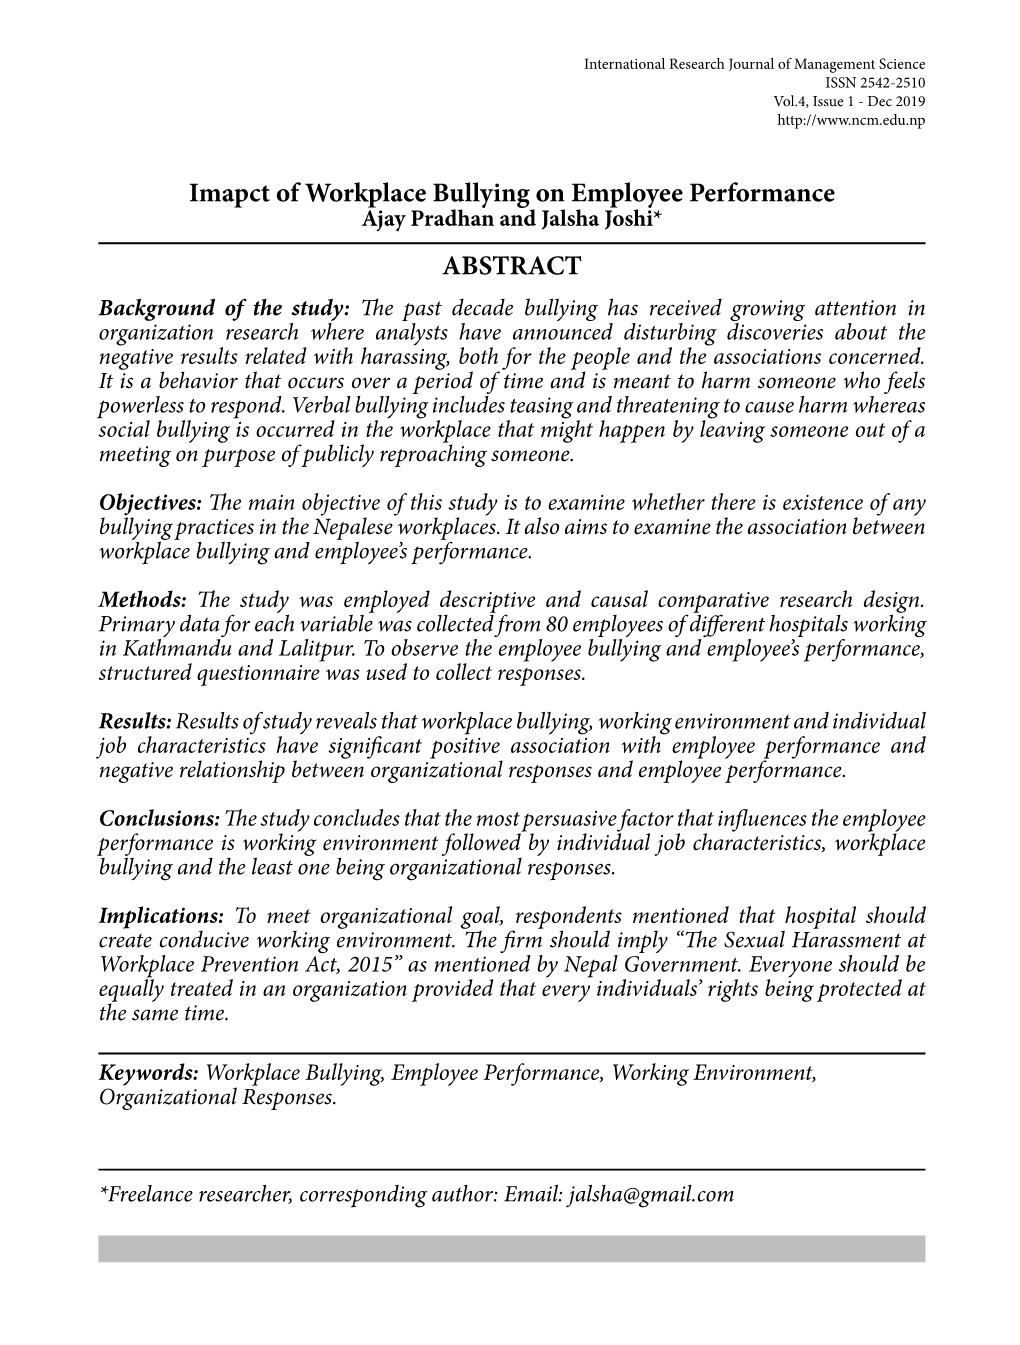 Imapct of Workplace Bullying on Employee Performance ABSTRACT